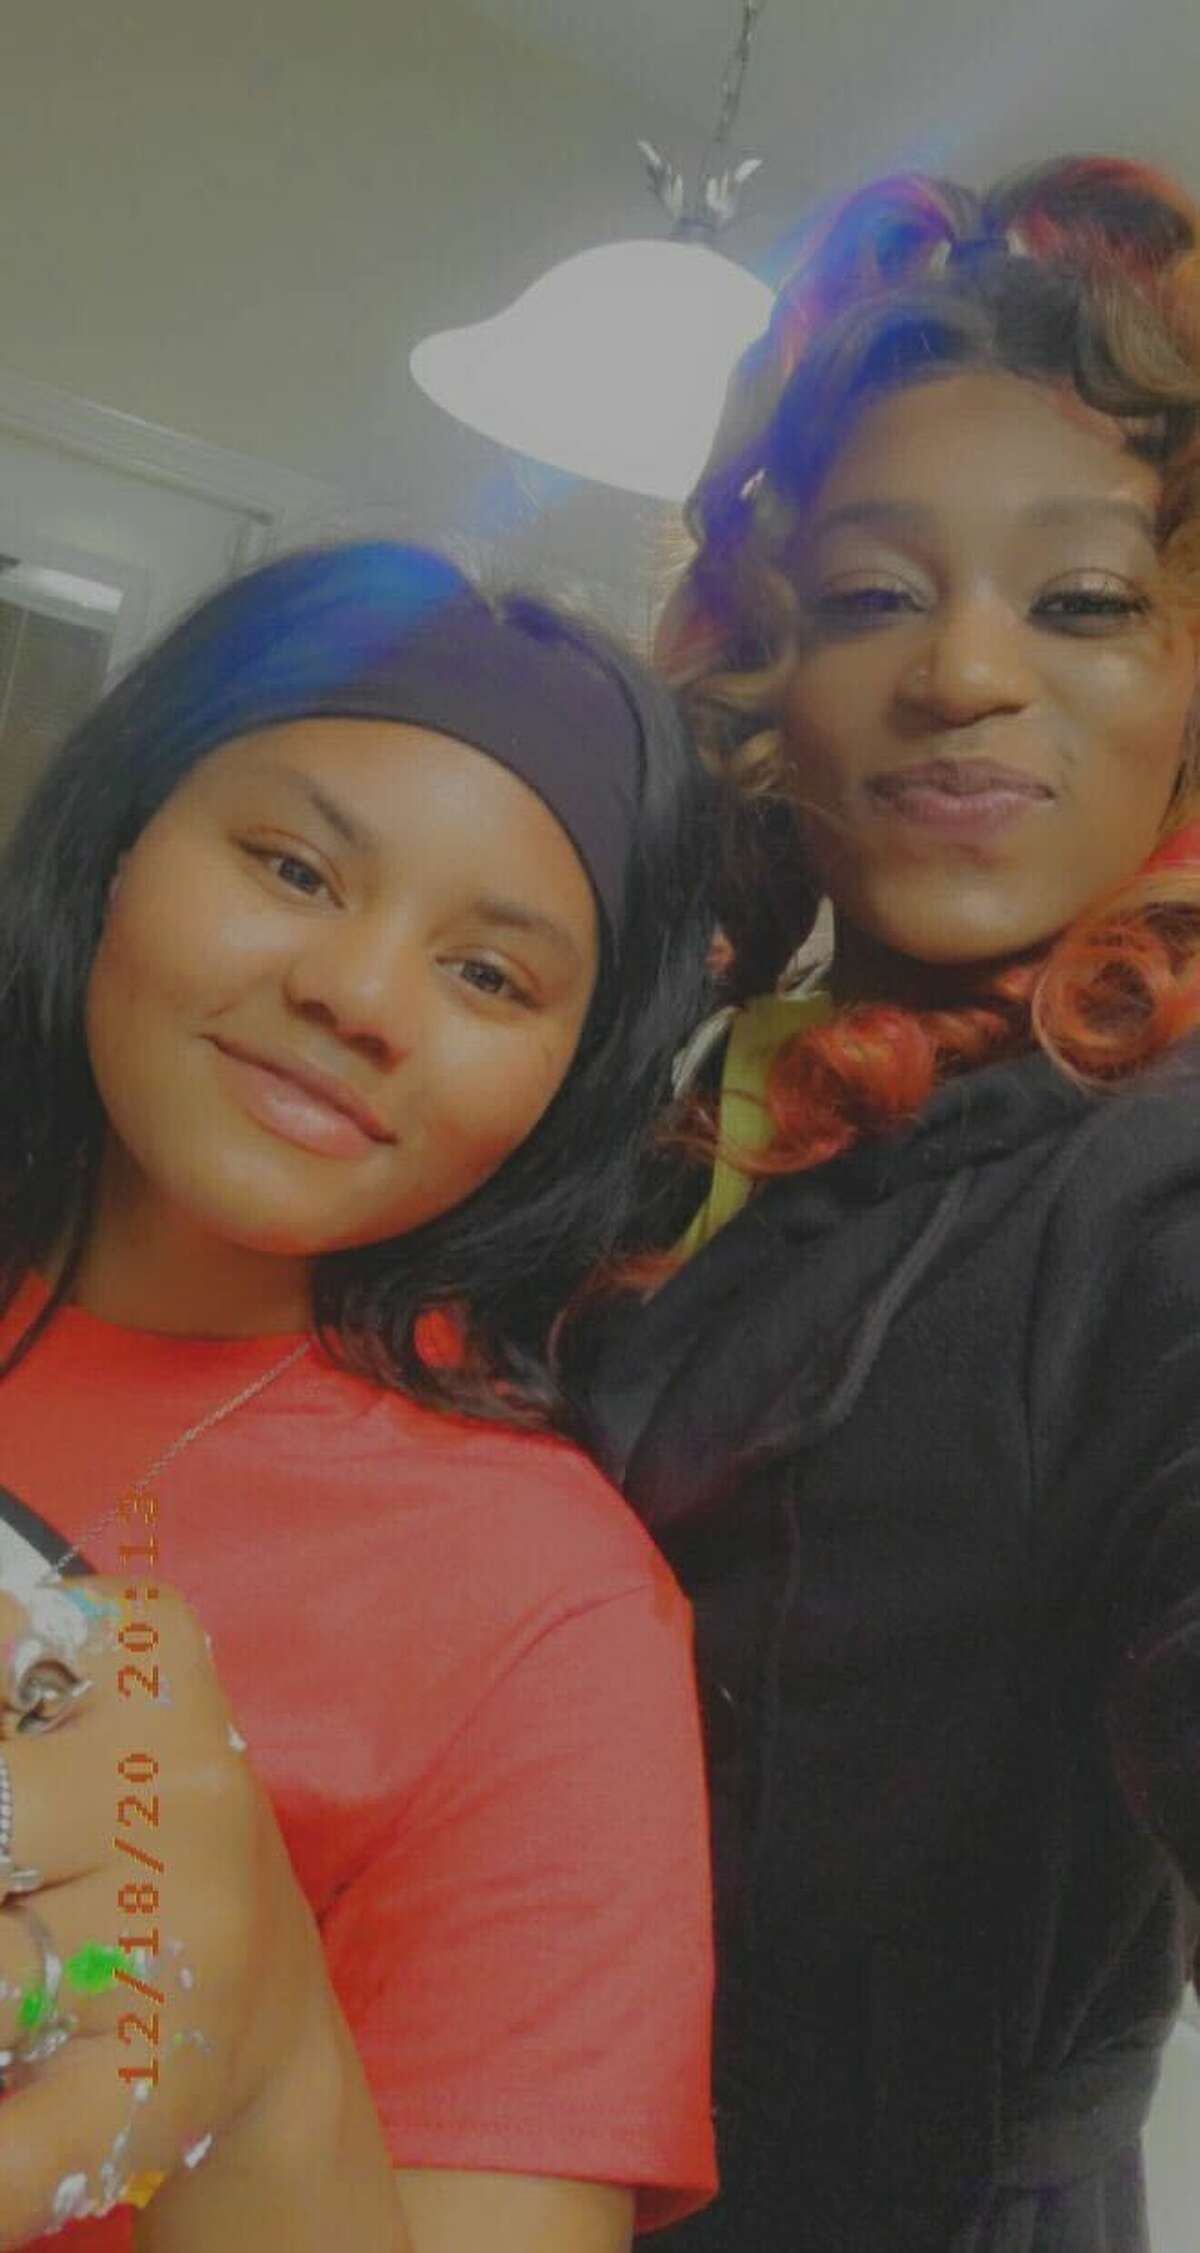 Disha Allen (left), a 25-year-old mother who resided in the Atascocita area, was fatally shot while attending a vigil for a homicide victim in Baytown, Texas on Dec. 12, 2021. Undated photo shows her with her sister, Shae Siler. “She was an amazing person. She cared for her family. She cared for her friends."